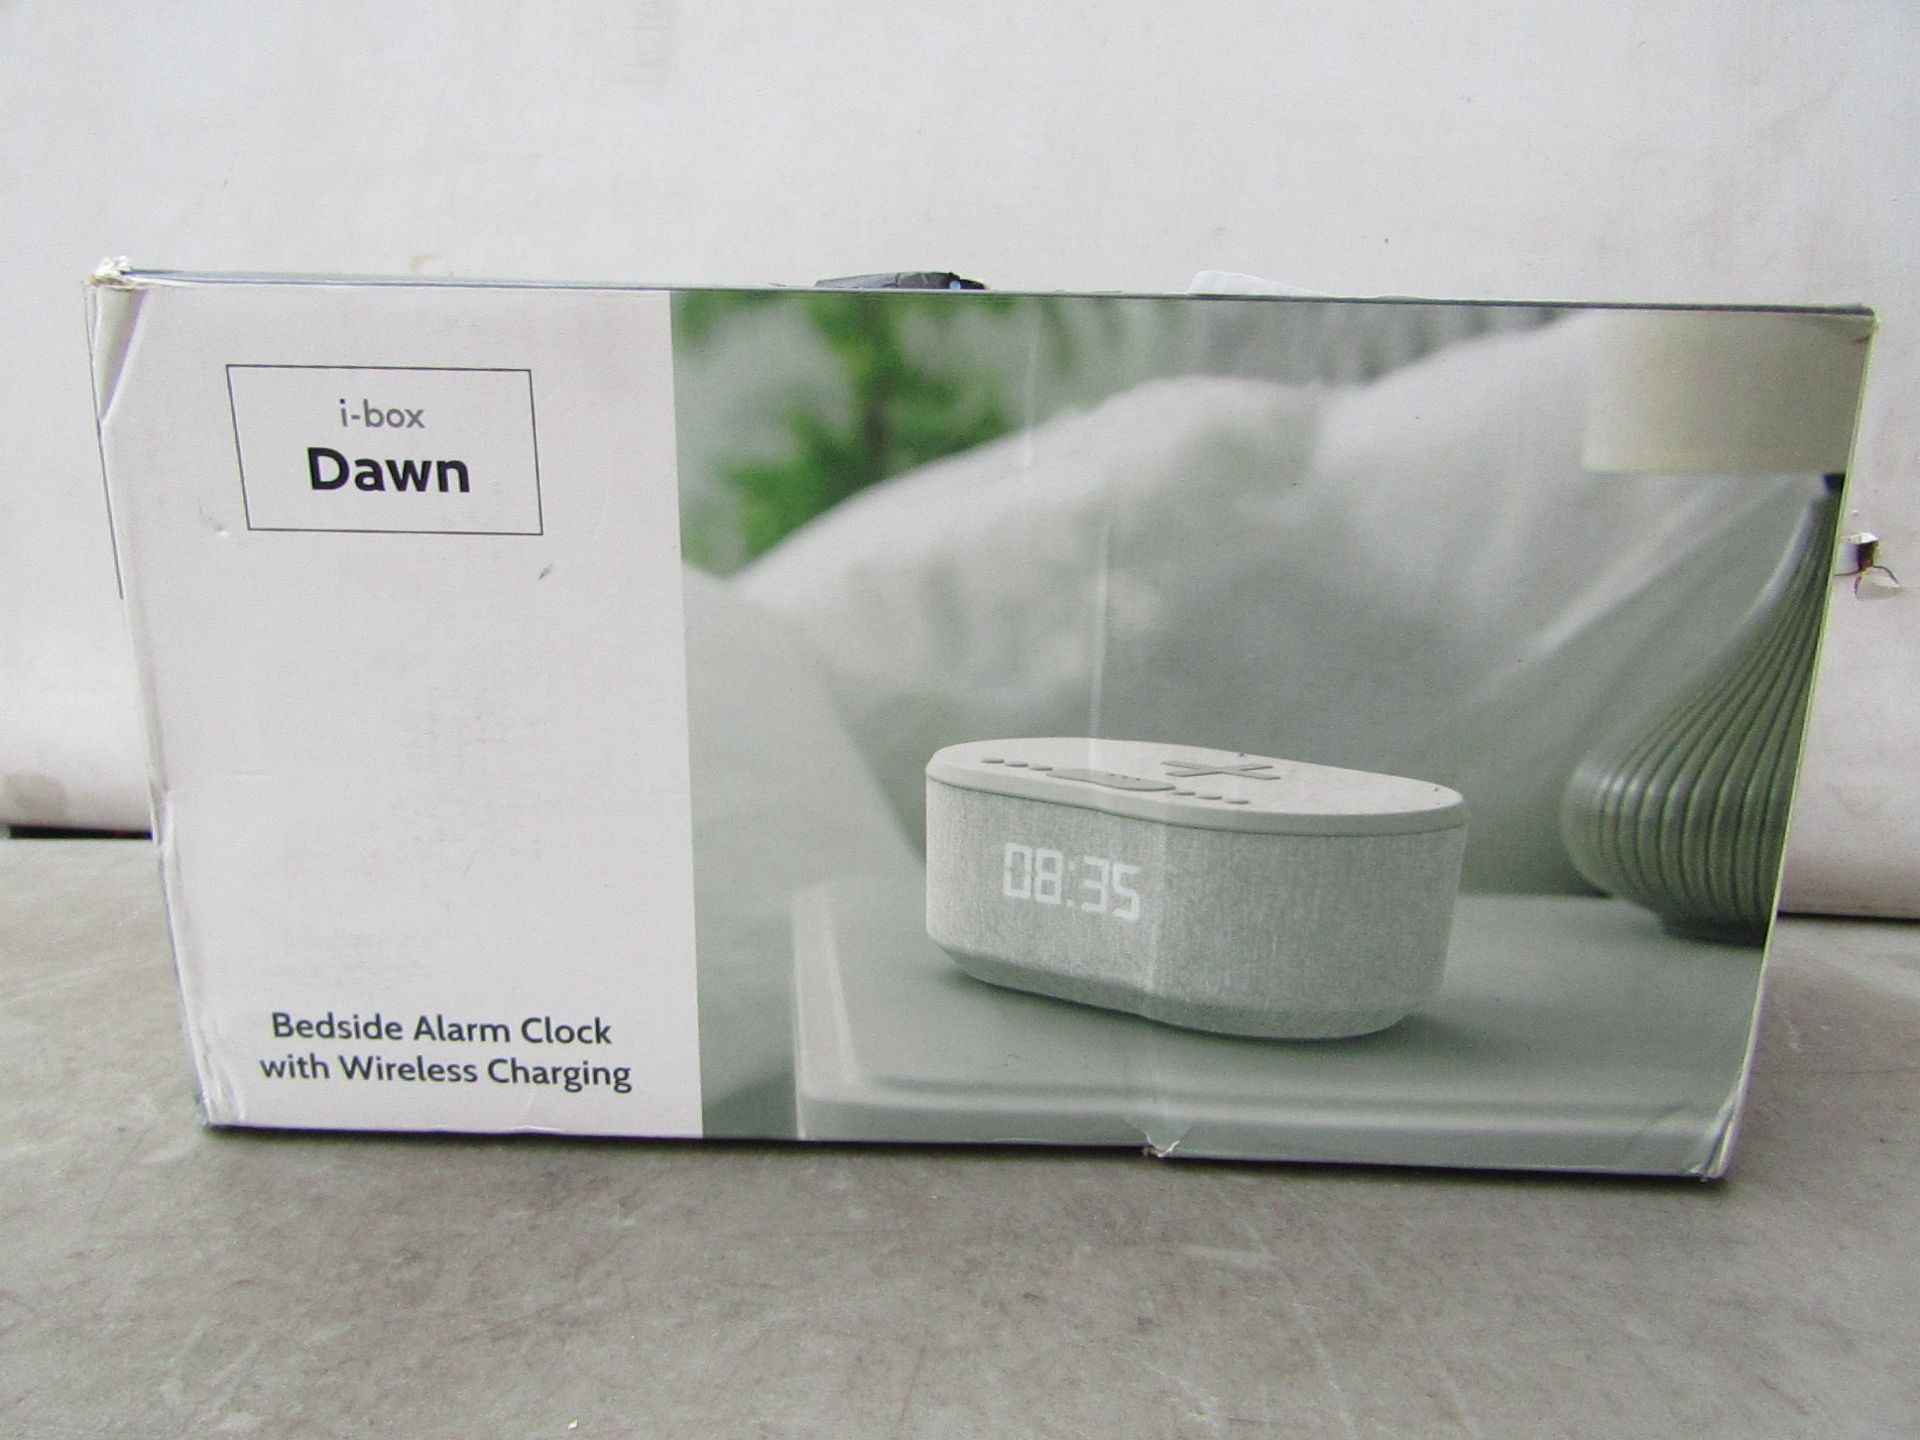 Ibox Dawn Bedside Alarm Clock with Wireless Charging Station - Tested Working & Boxed - RRP £35